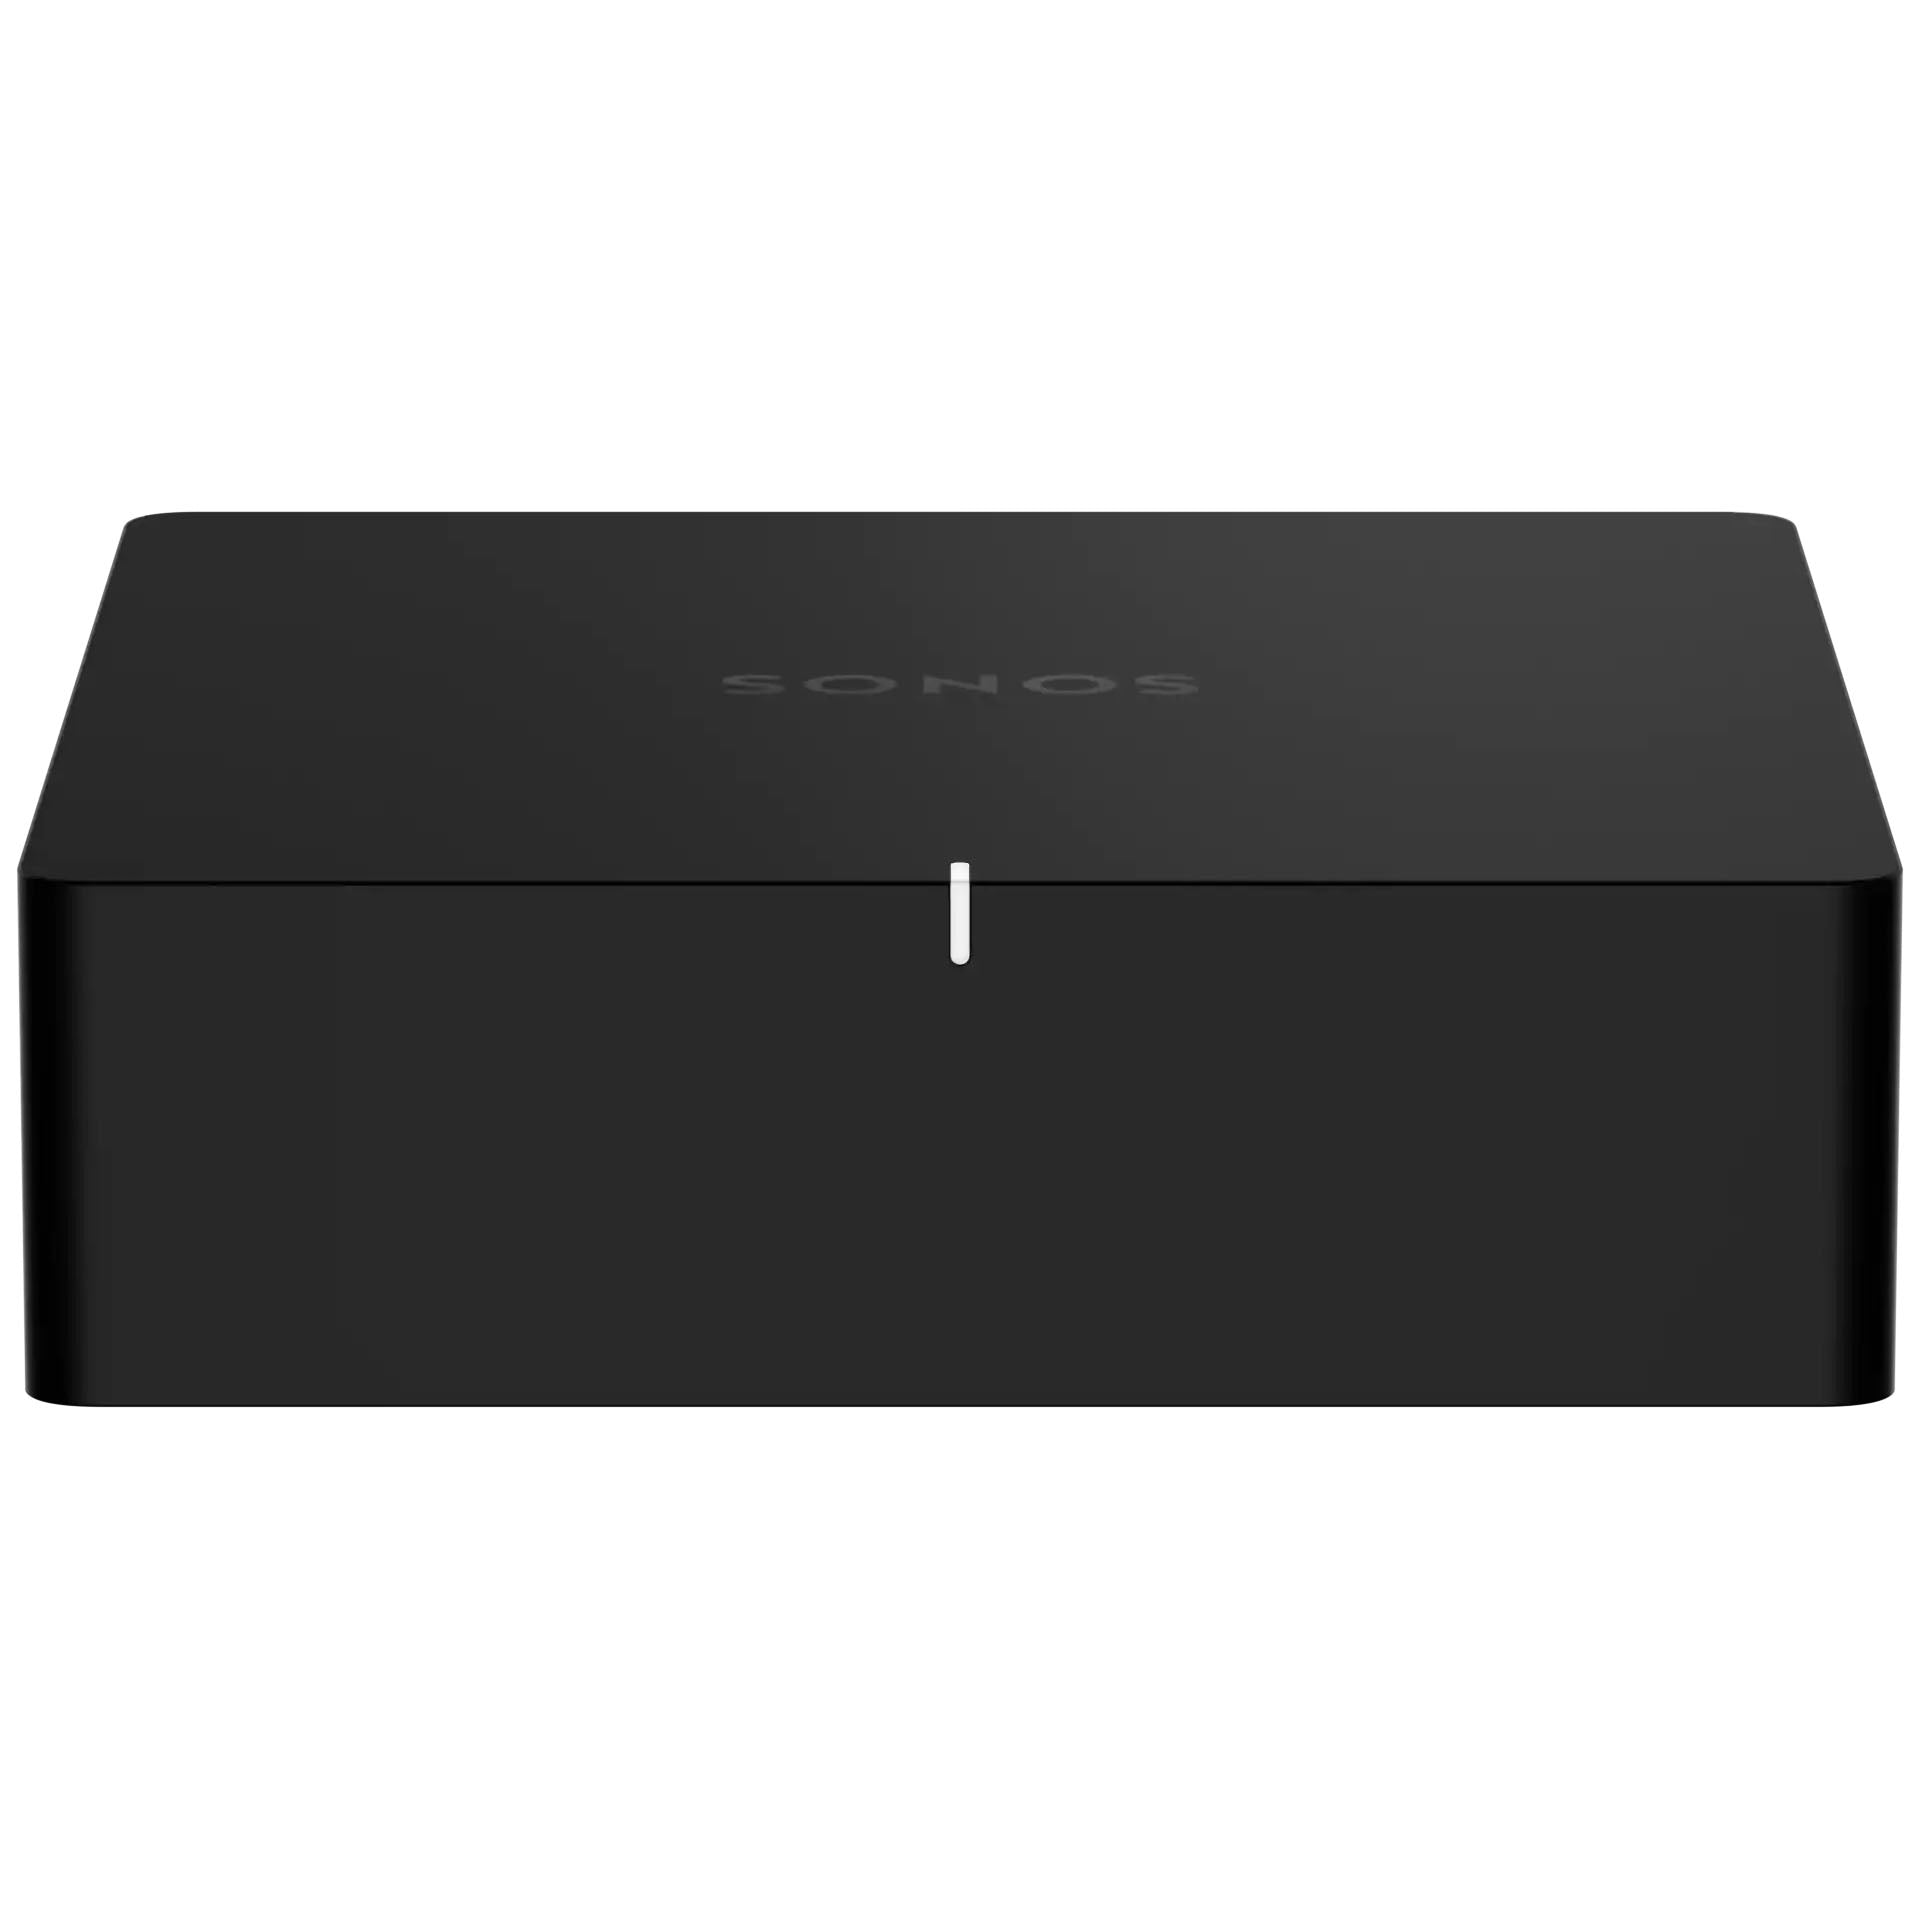 Sonos Port - A WiFi Network Streamer with Built-in DAC